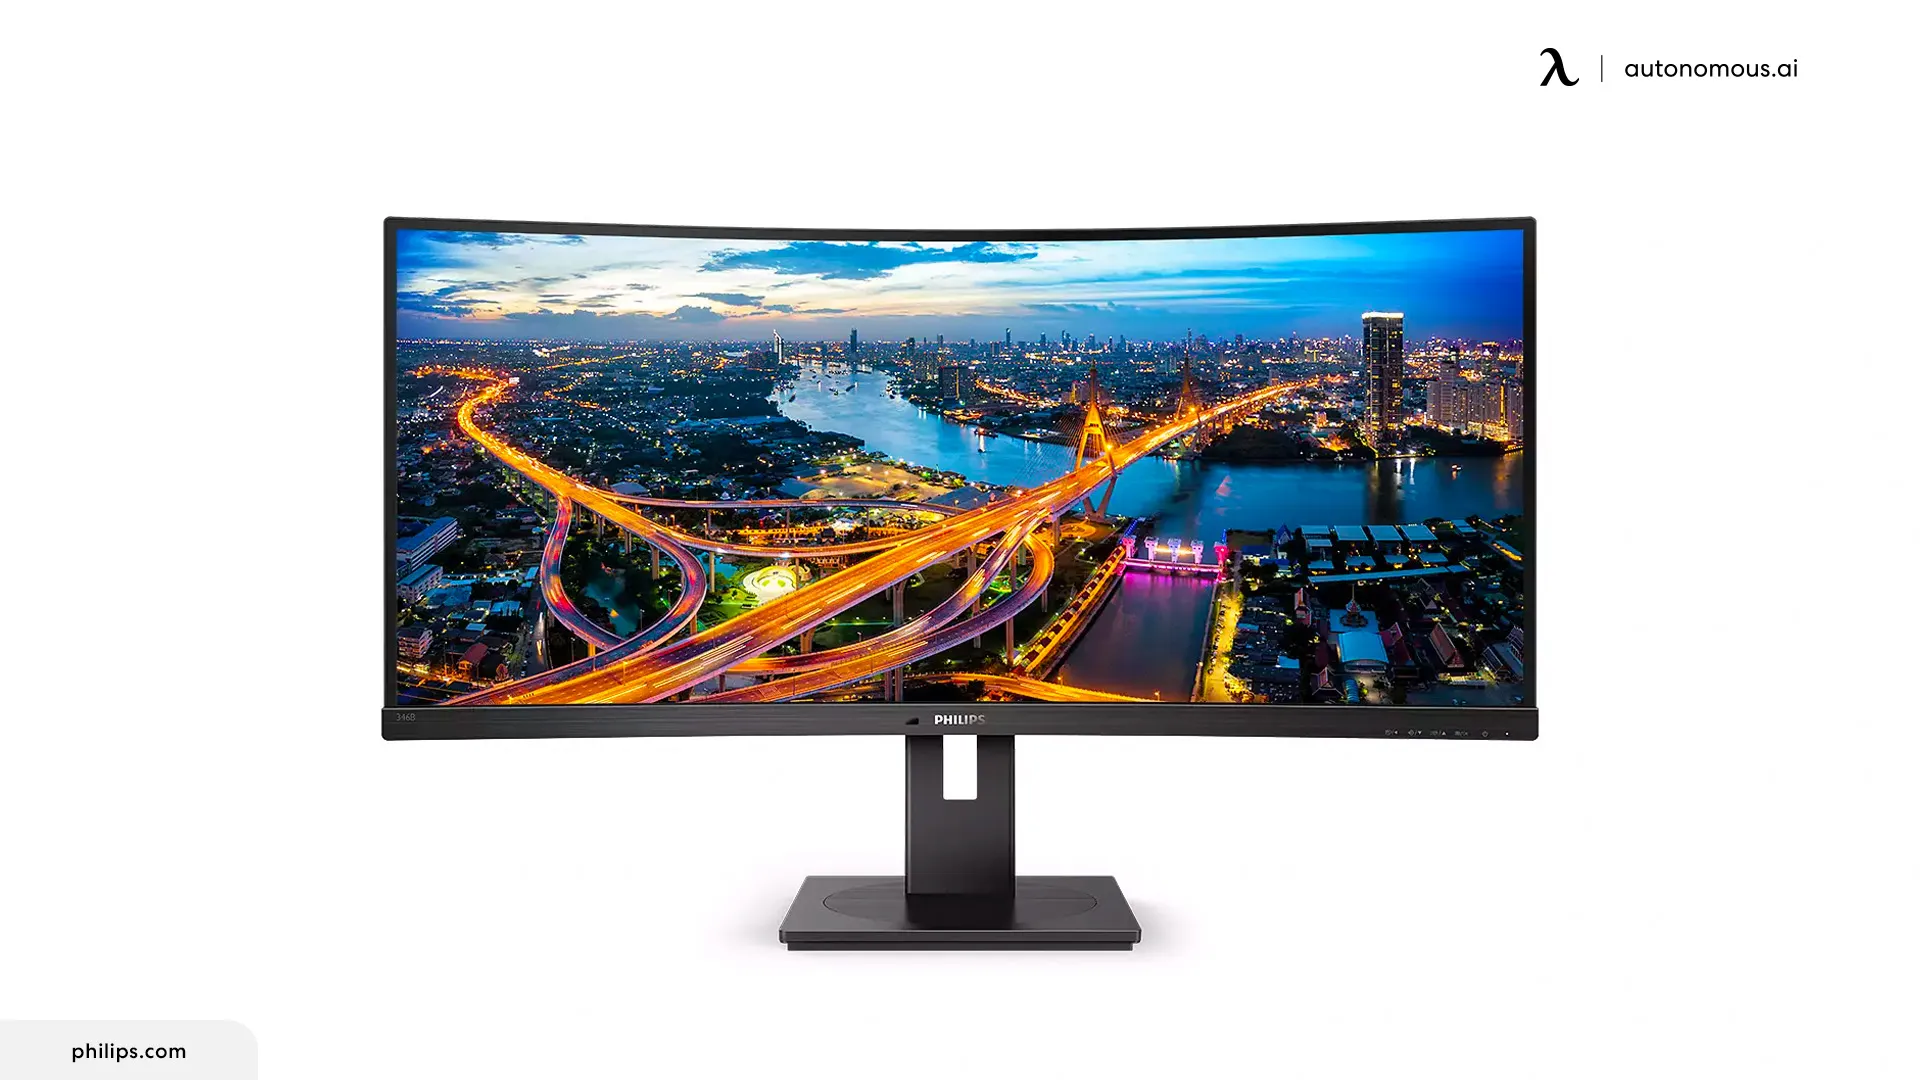 Curved UltraWide LCD Monitor